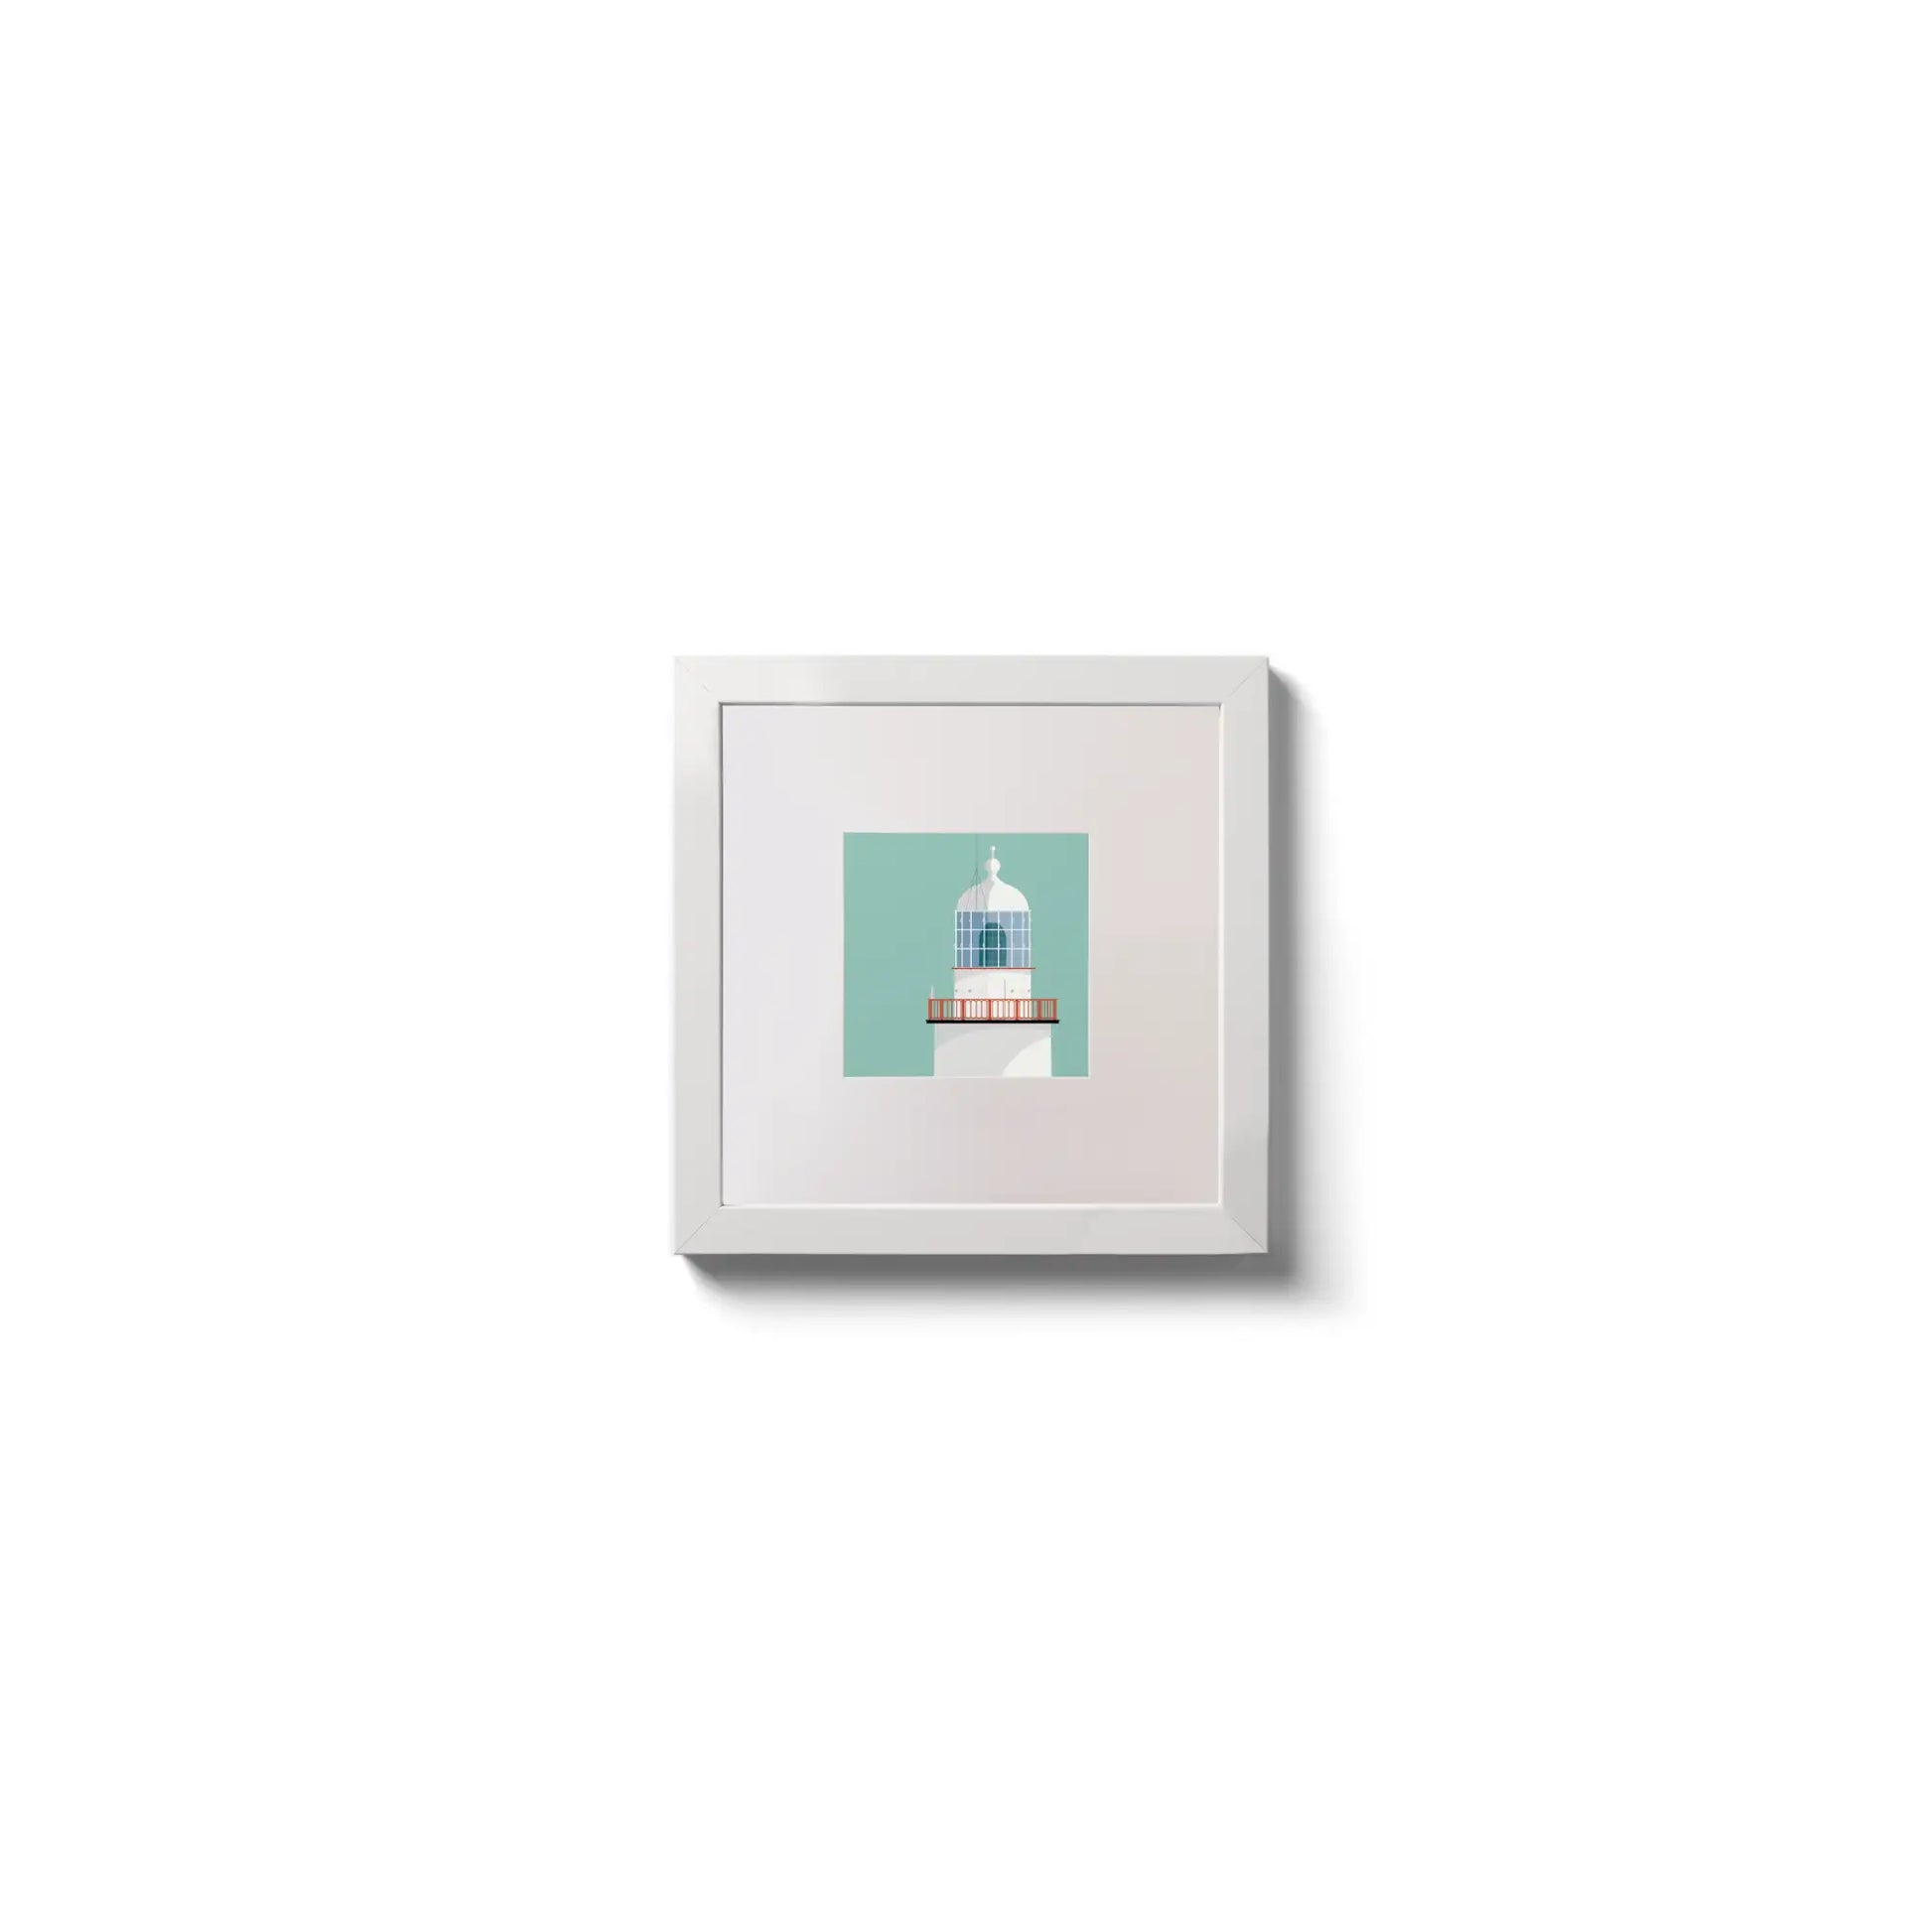 Illustration of Inistearaght lighthouse on an ocean green background,  in a white square frame measuring 10x10cm.